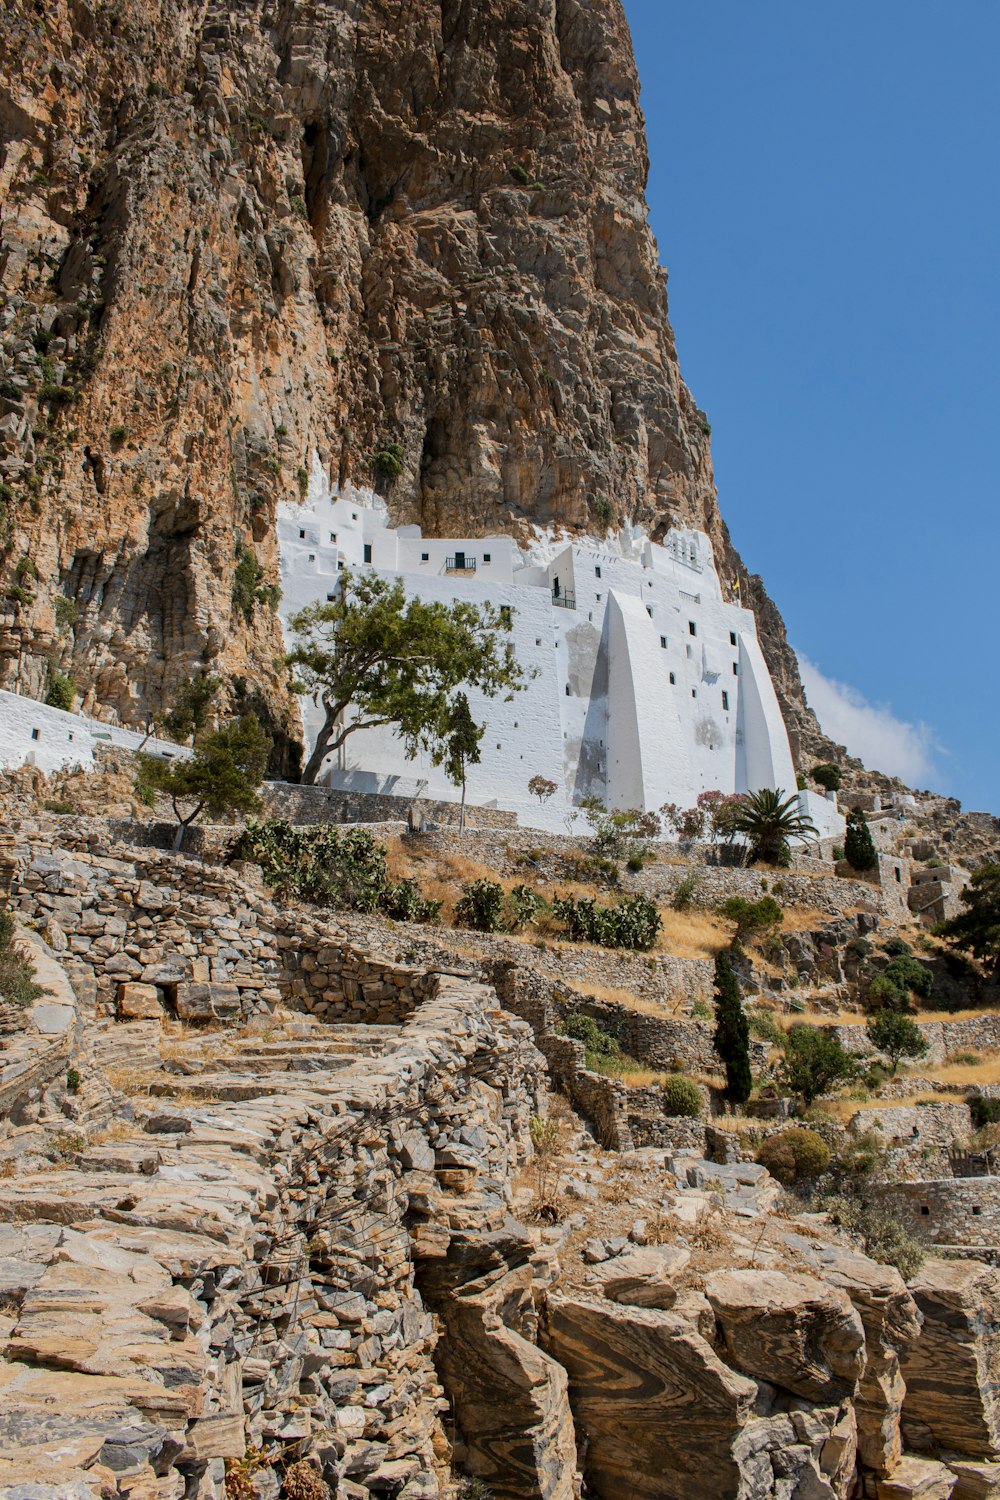 a stone building on a cliff with Amorgos in the background